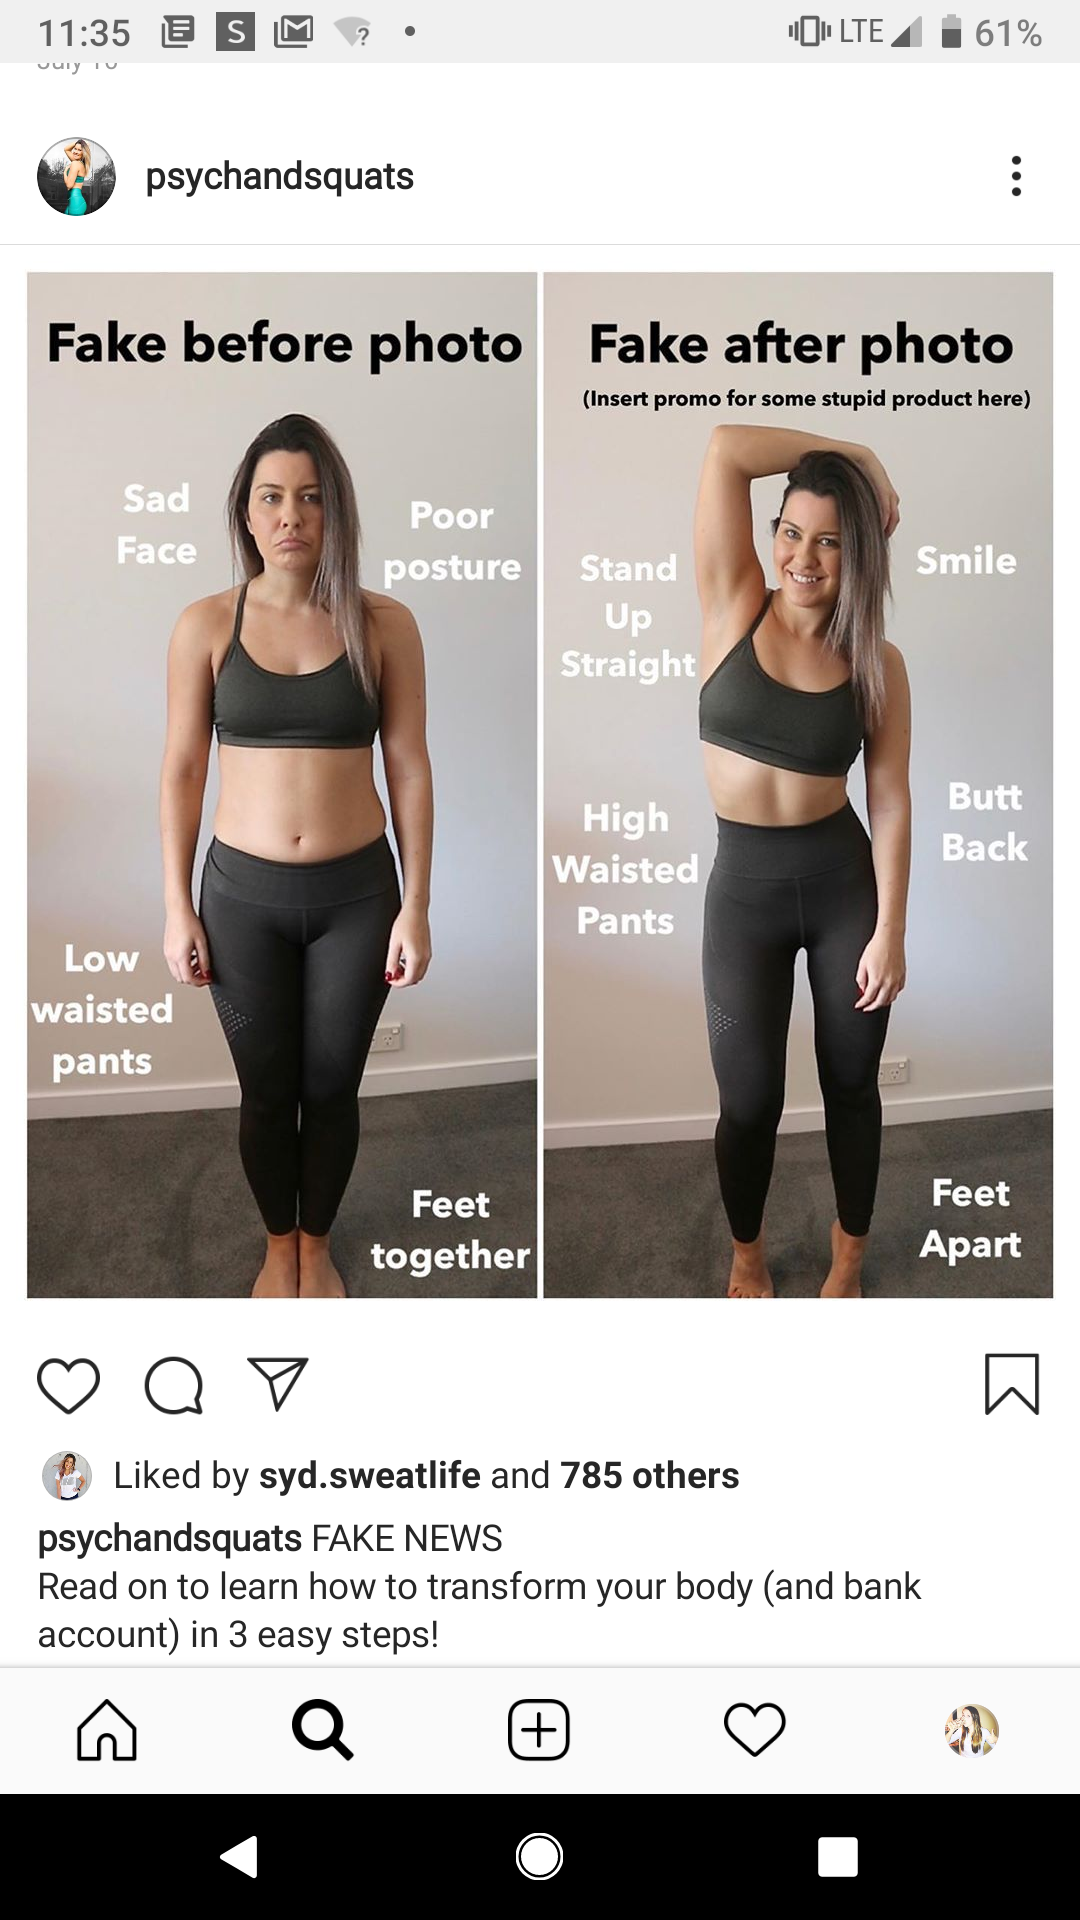 Fake before photo Fake after photo Sad Face Poor posture Smile stand Up Straight Butt Back High Waisted Pants Low waisted pants Feet together Feet Apart